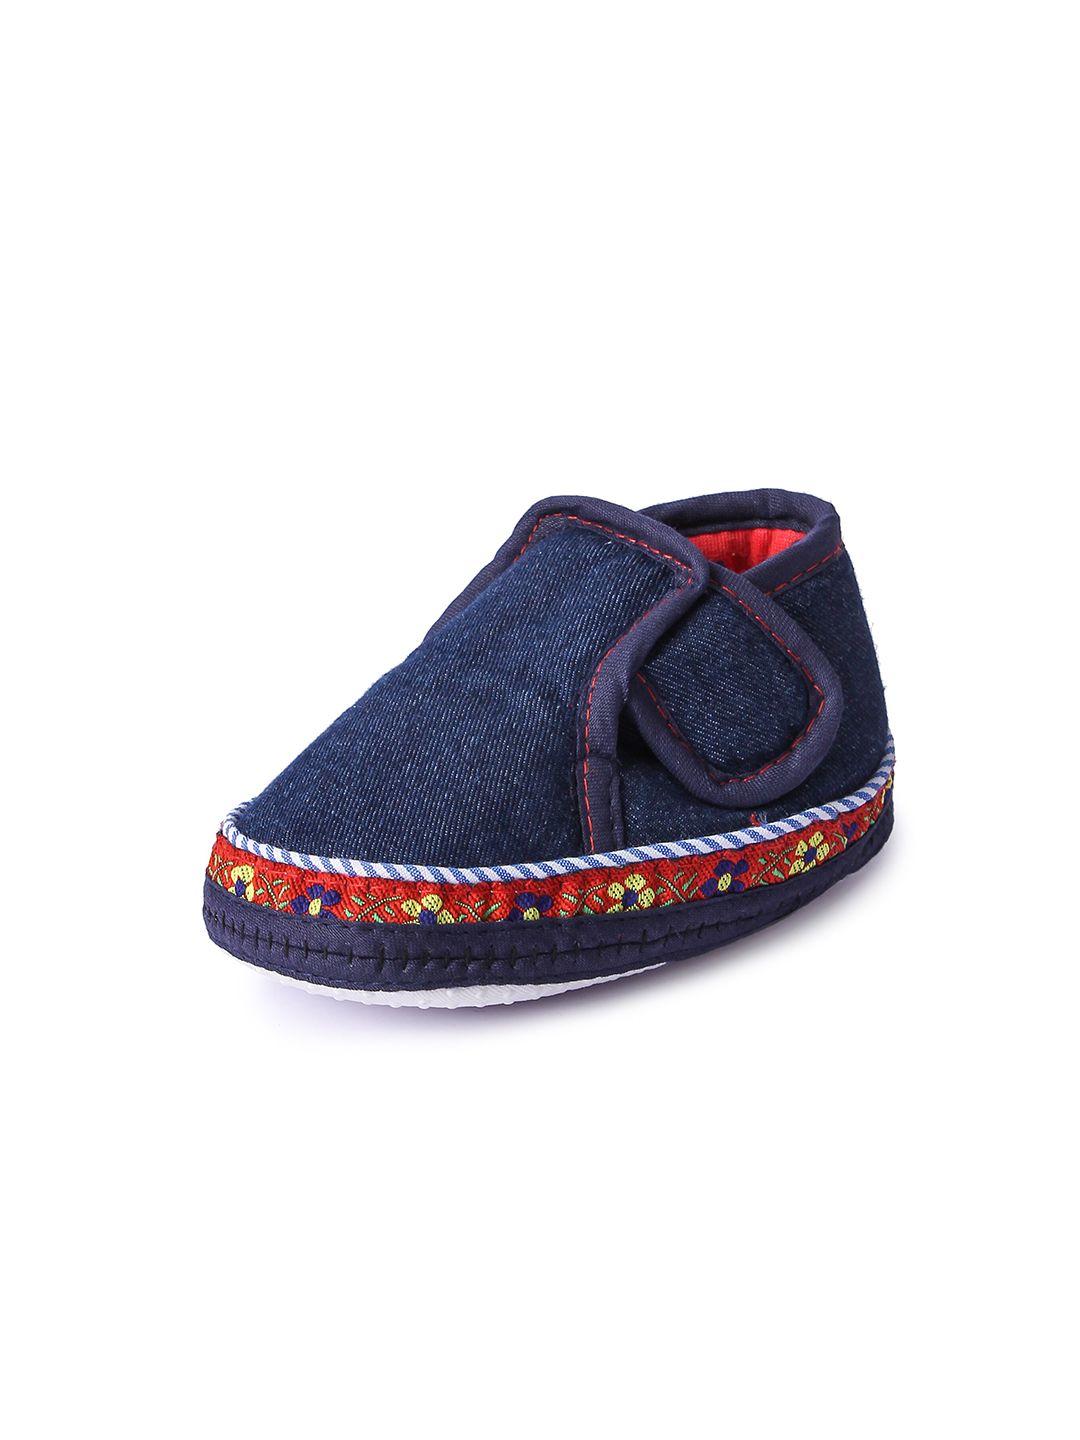 butterthief unisex infant kids navy blue & red shoe-style sandals